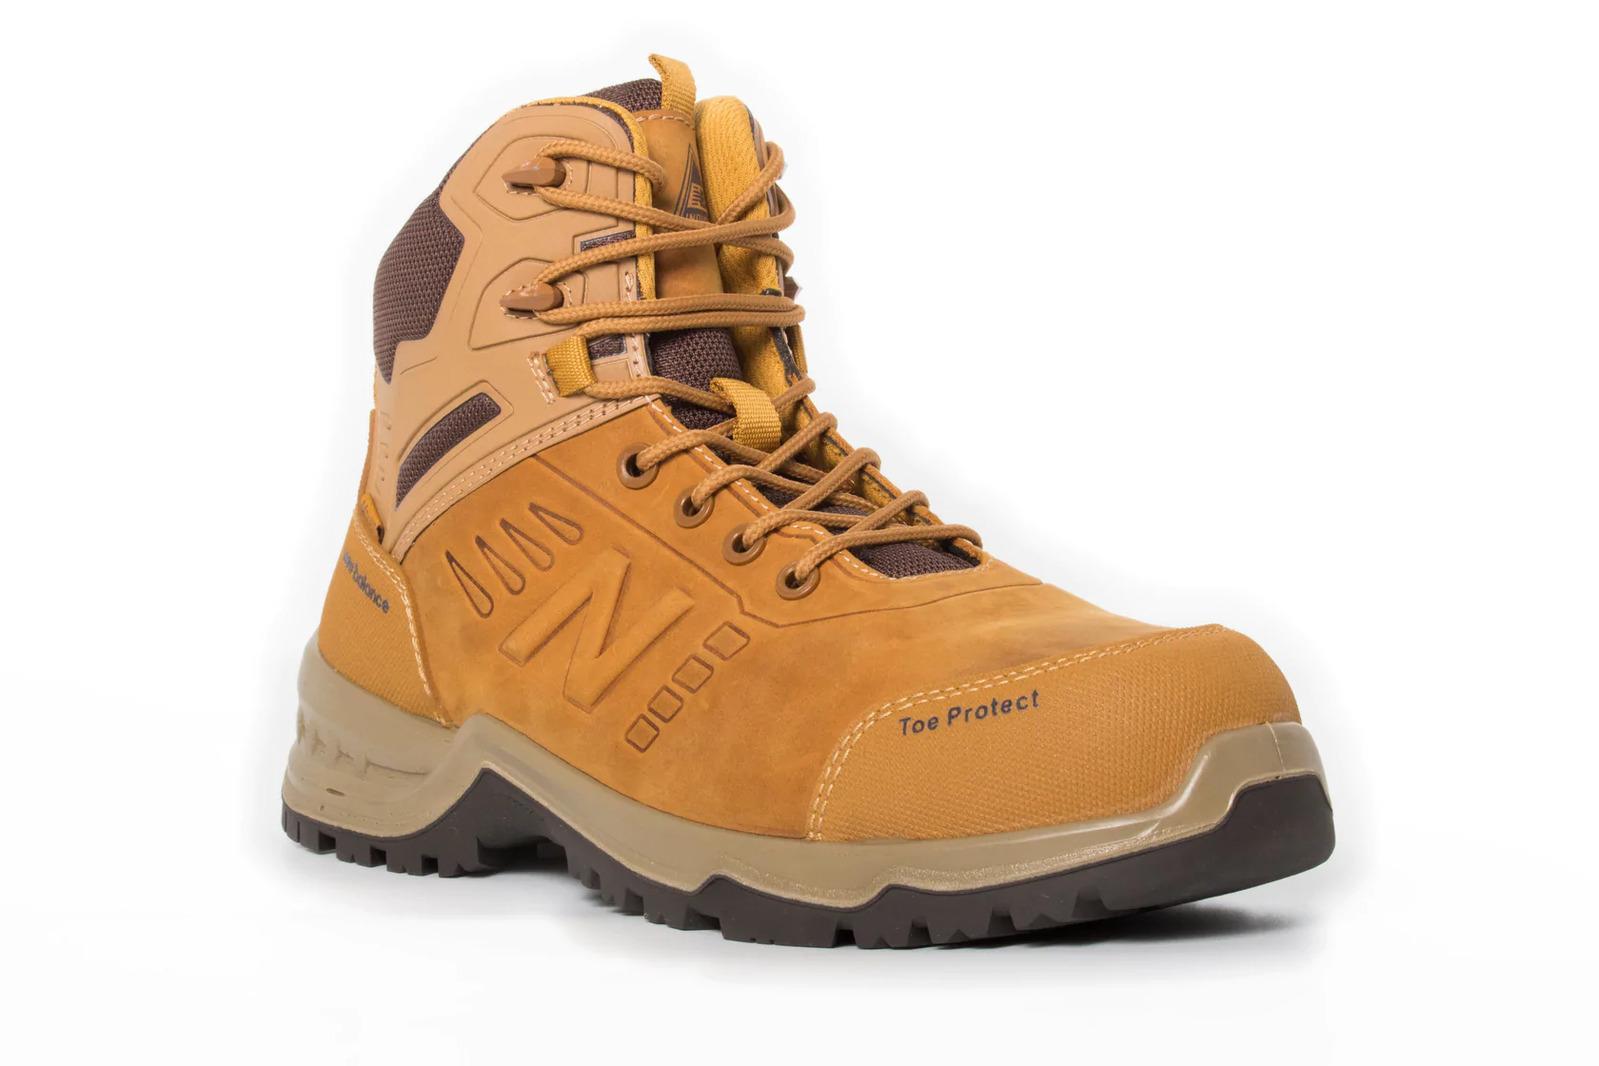 New Balance Mens Contour Steel Toe Cap Safety Work Boots with Zip - Wheat - US 9.5 Width:2E